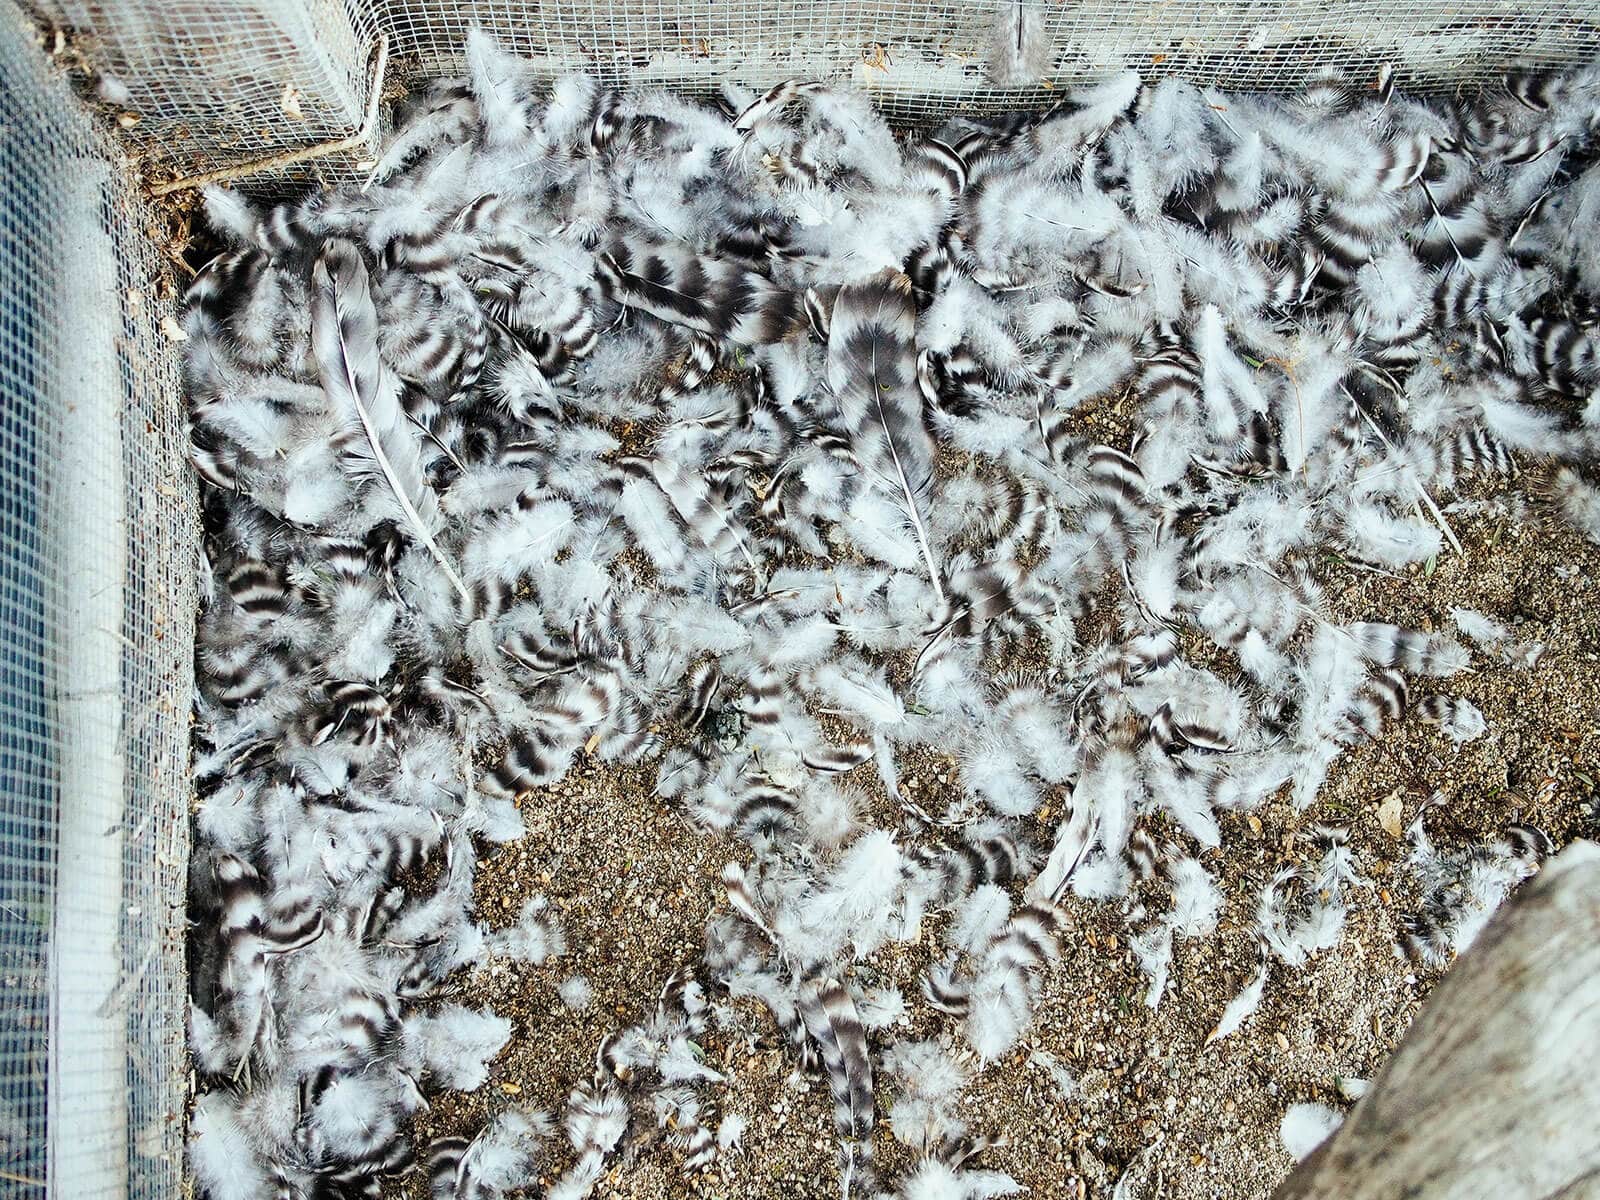 Overhead view of chicken run with piles of black and white feathers in the corner